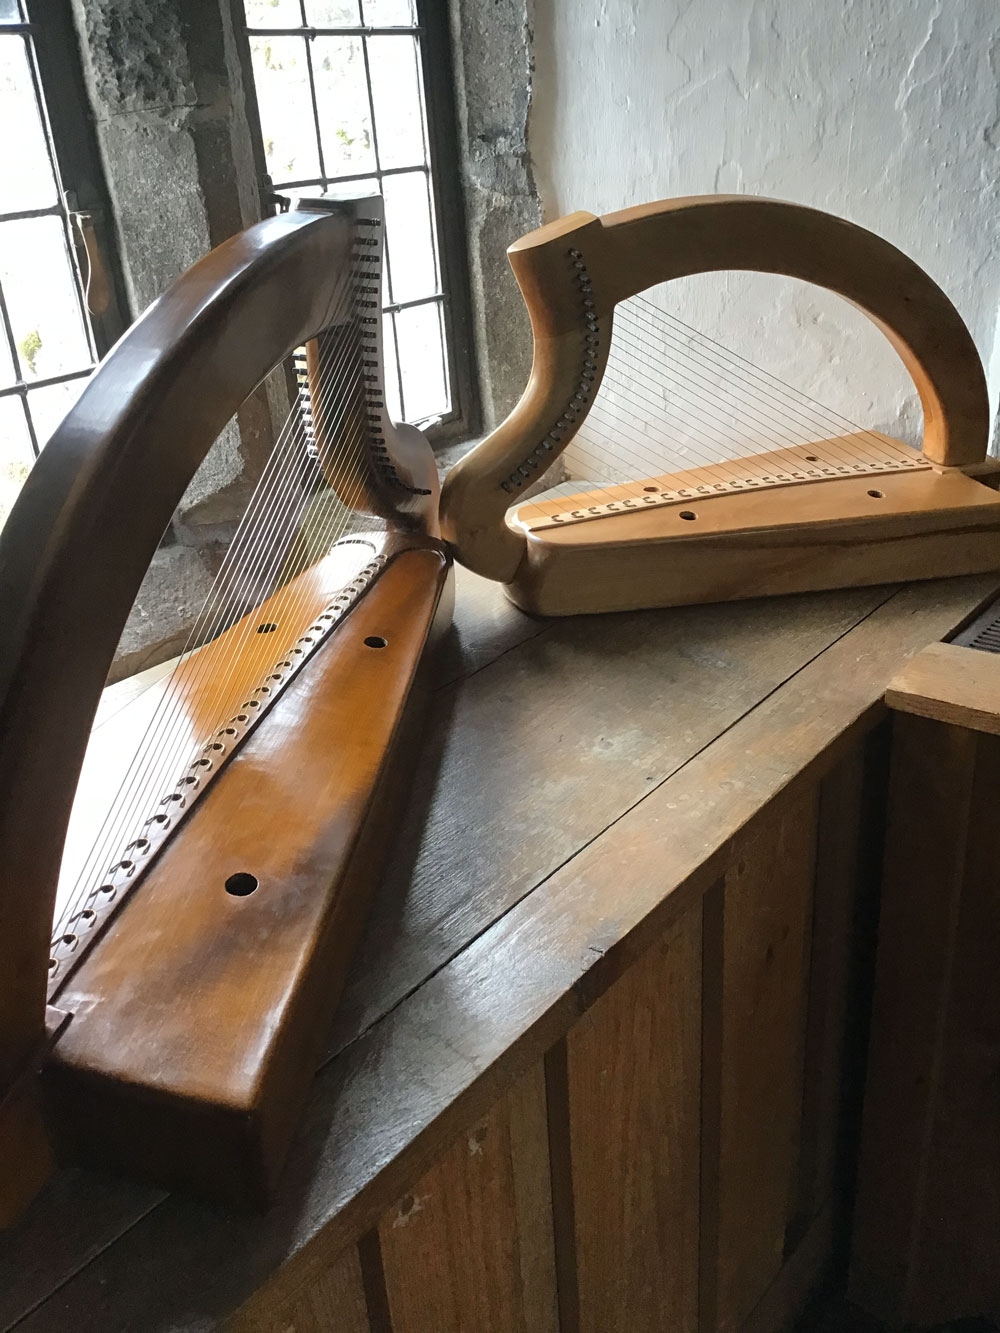 Two wire-strung harps in Parke's Castle.